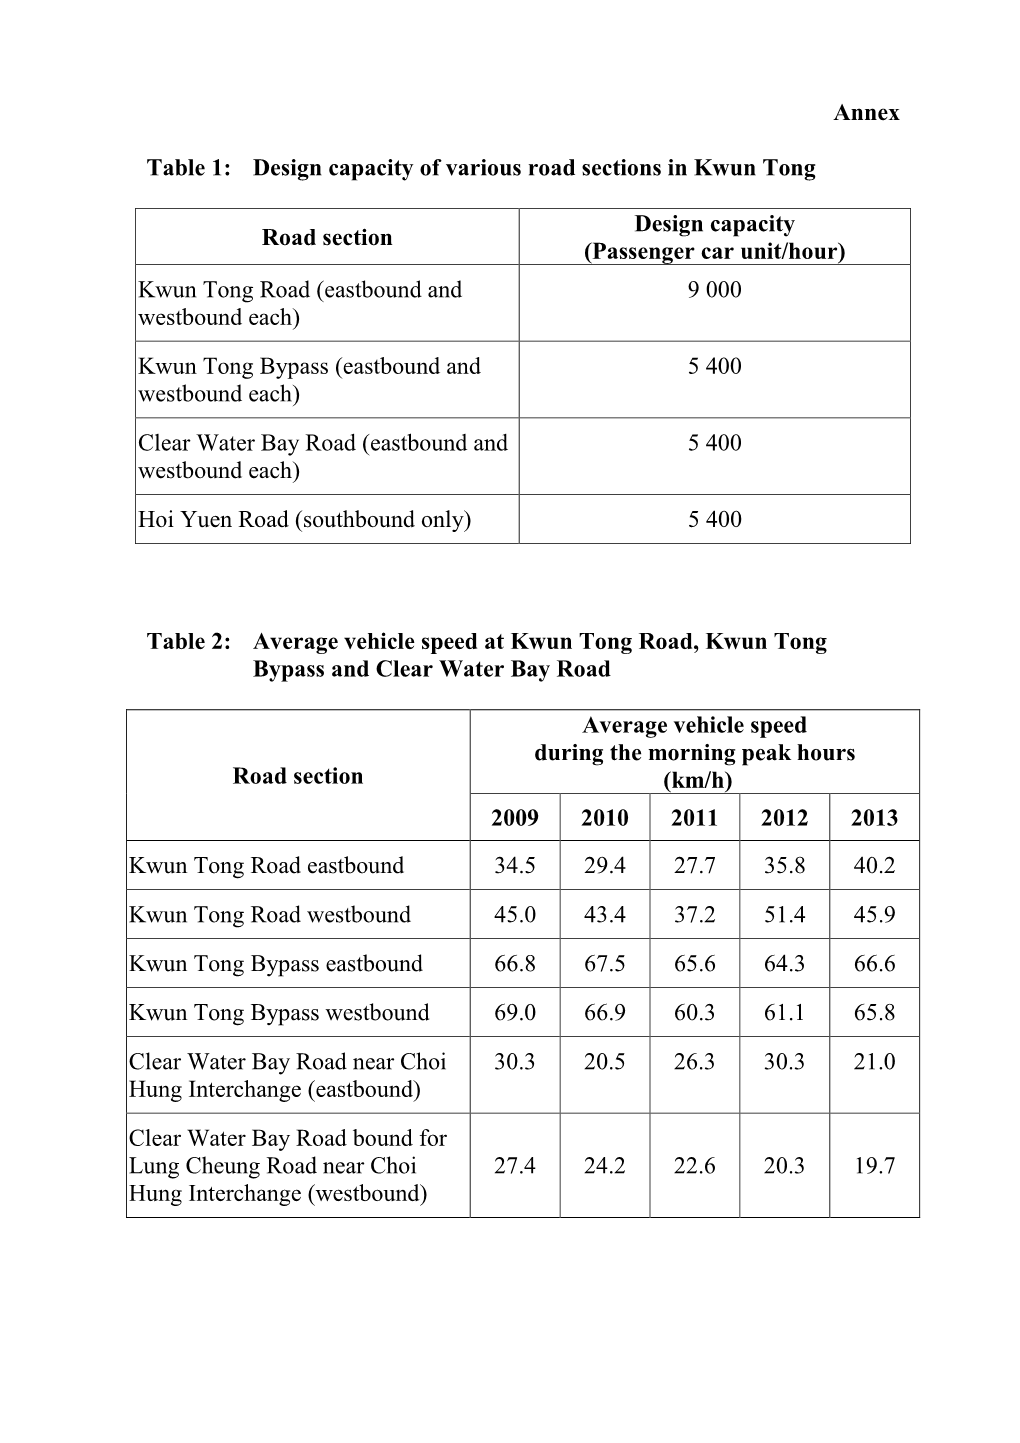 Annex Table 1: Design Capacity of Various Road Sections in Kwun Tong